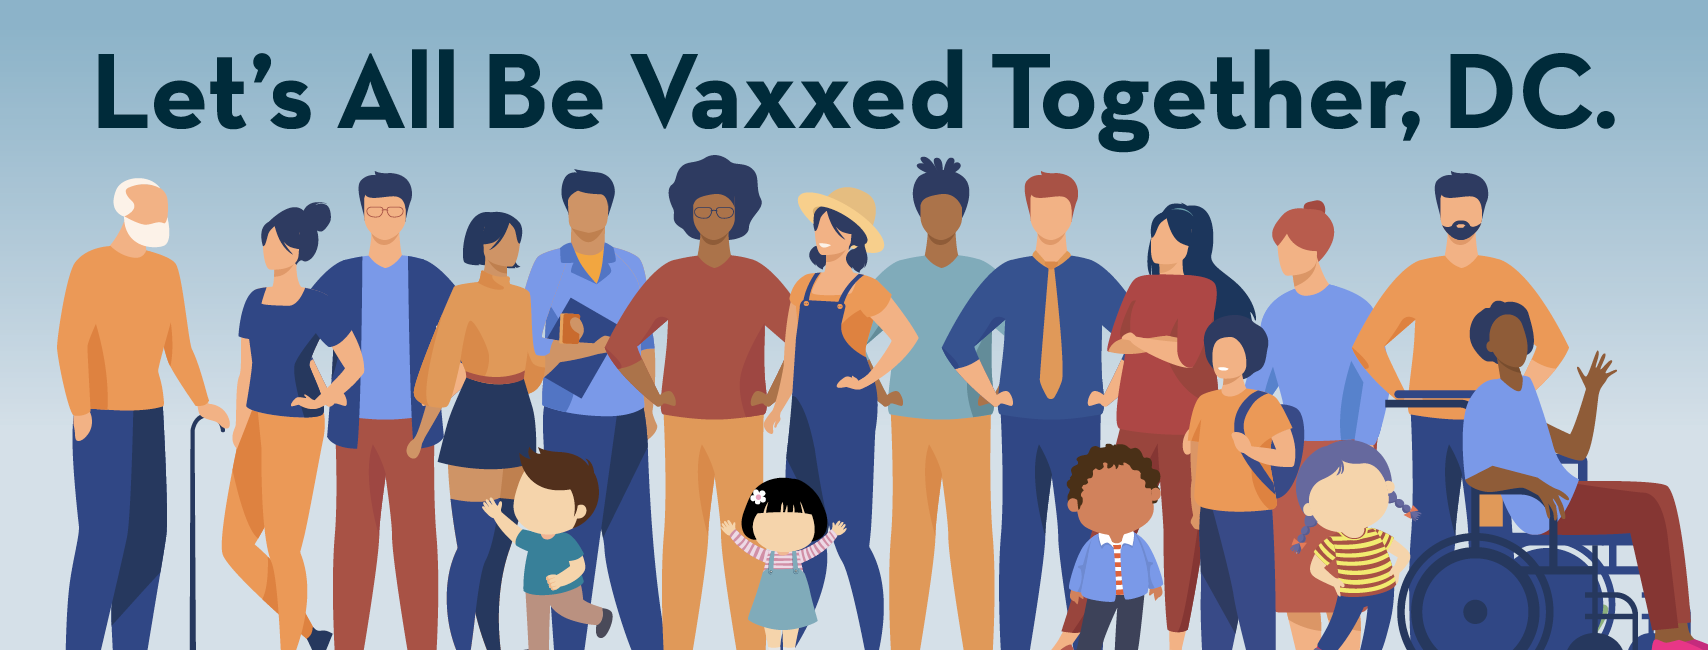 All DC residents 6 months and older are eligible to receive the COVID-19 vaccine. Let’s all be vaxxed together, DC!